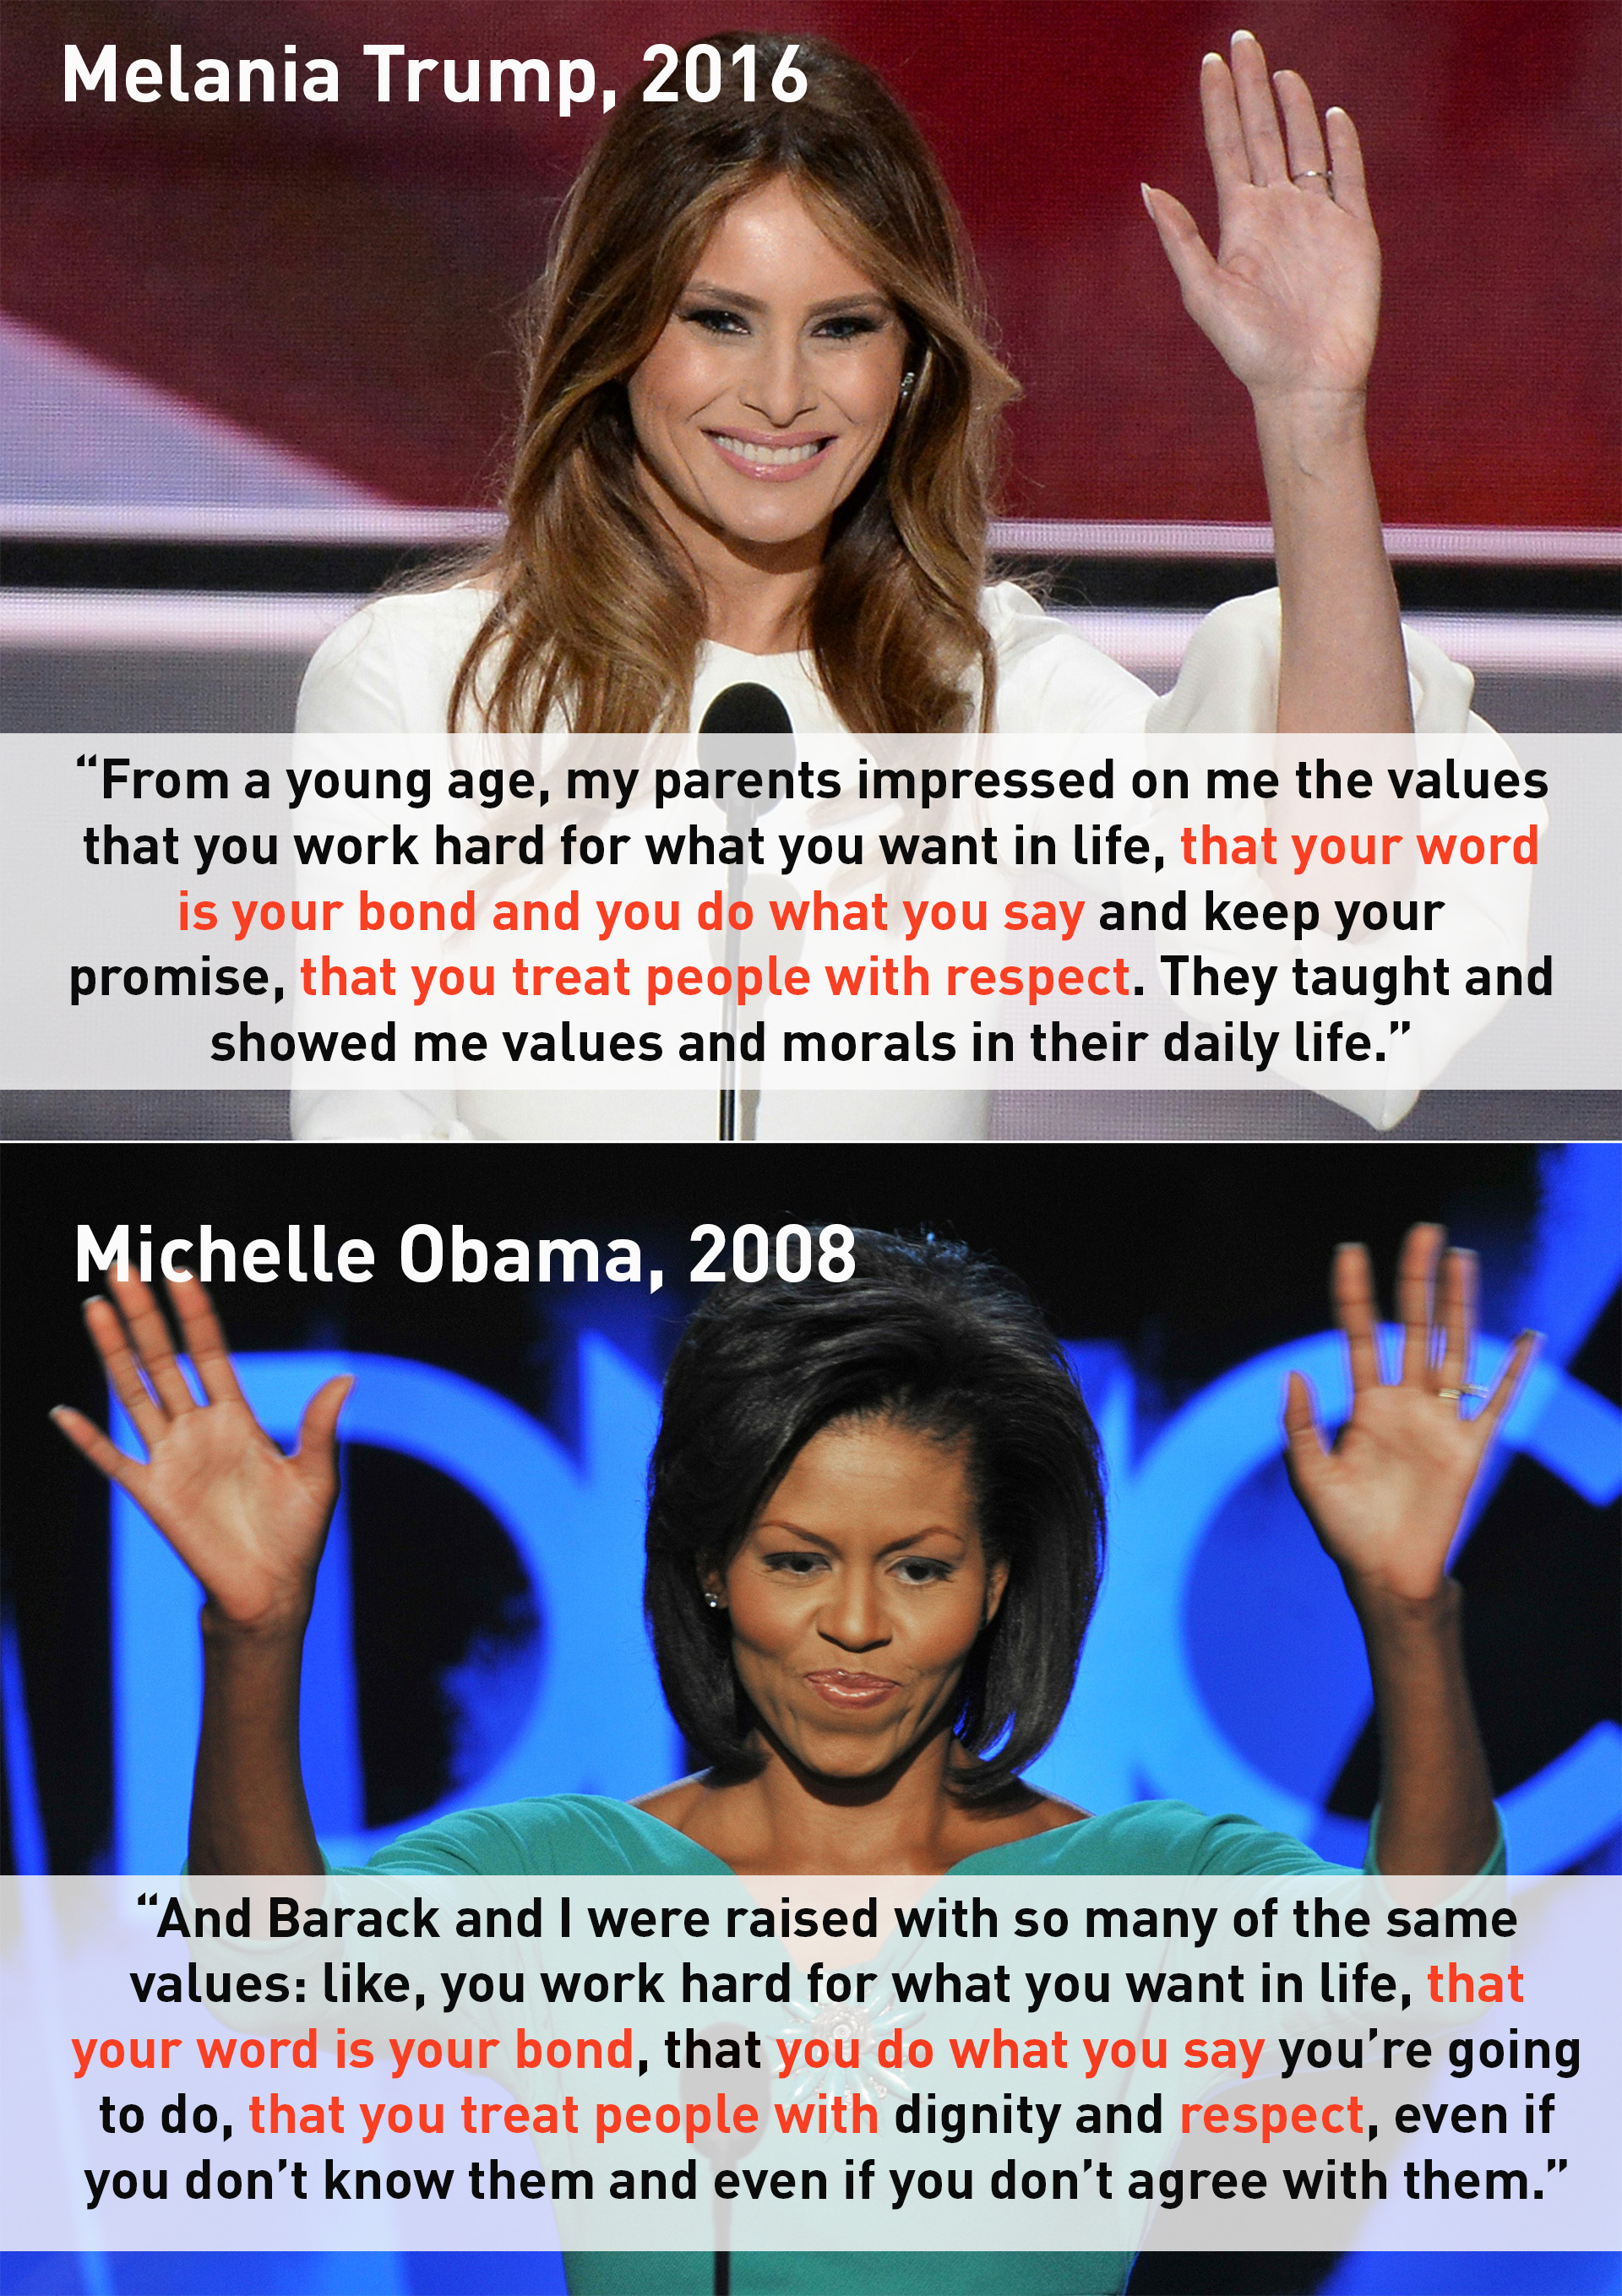 See the words that Melania Trump's speech at the Republican National Convention in 2016 have in common with Michelle Obama's speech at the 2008 Democratic National Convention. (1 of 2 quotes) (AFP PHOTO / Robyn Beck and Paul J. Richards)